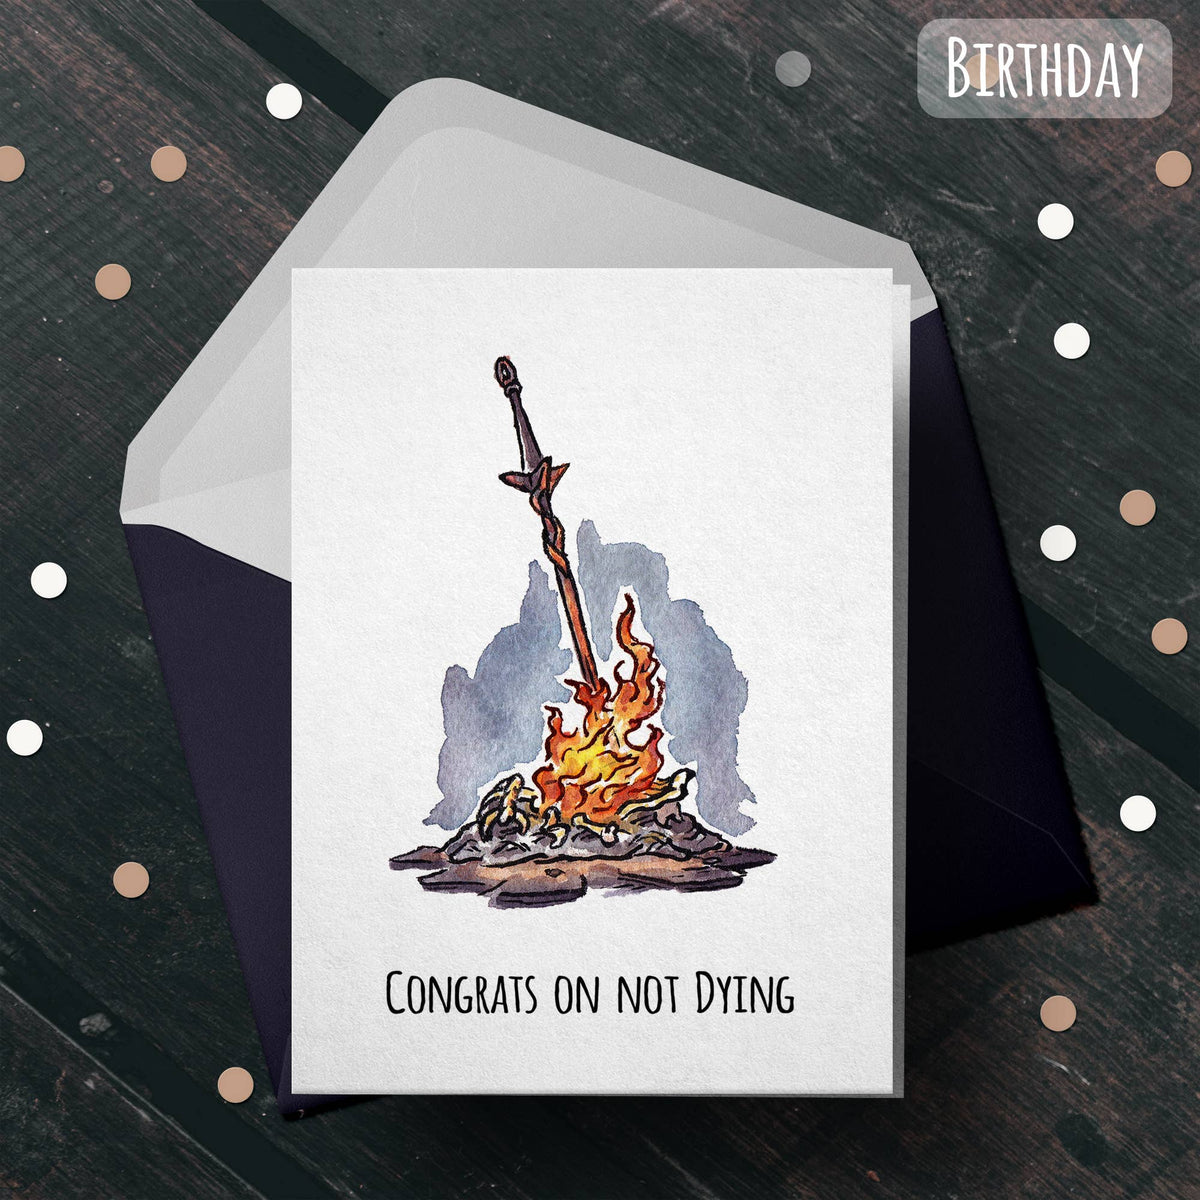 "Congrats on Not Dying" - Dark Souls Birthday Card for Gamer